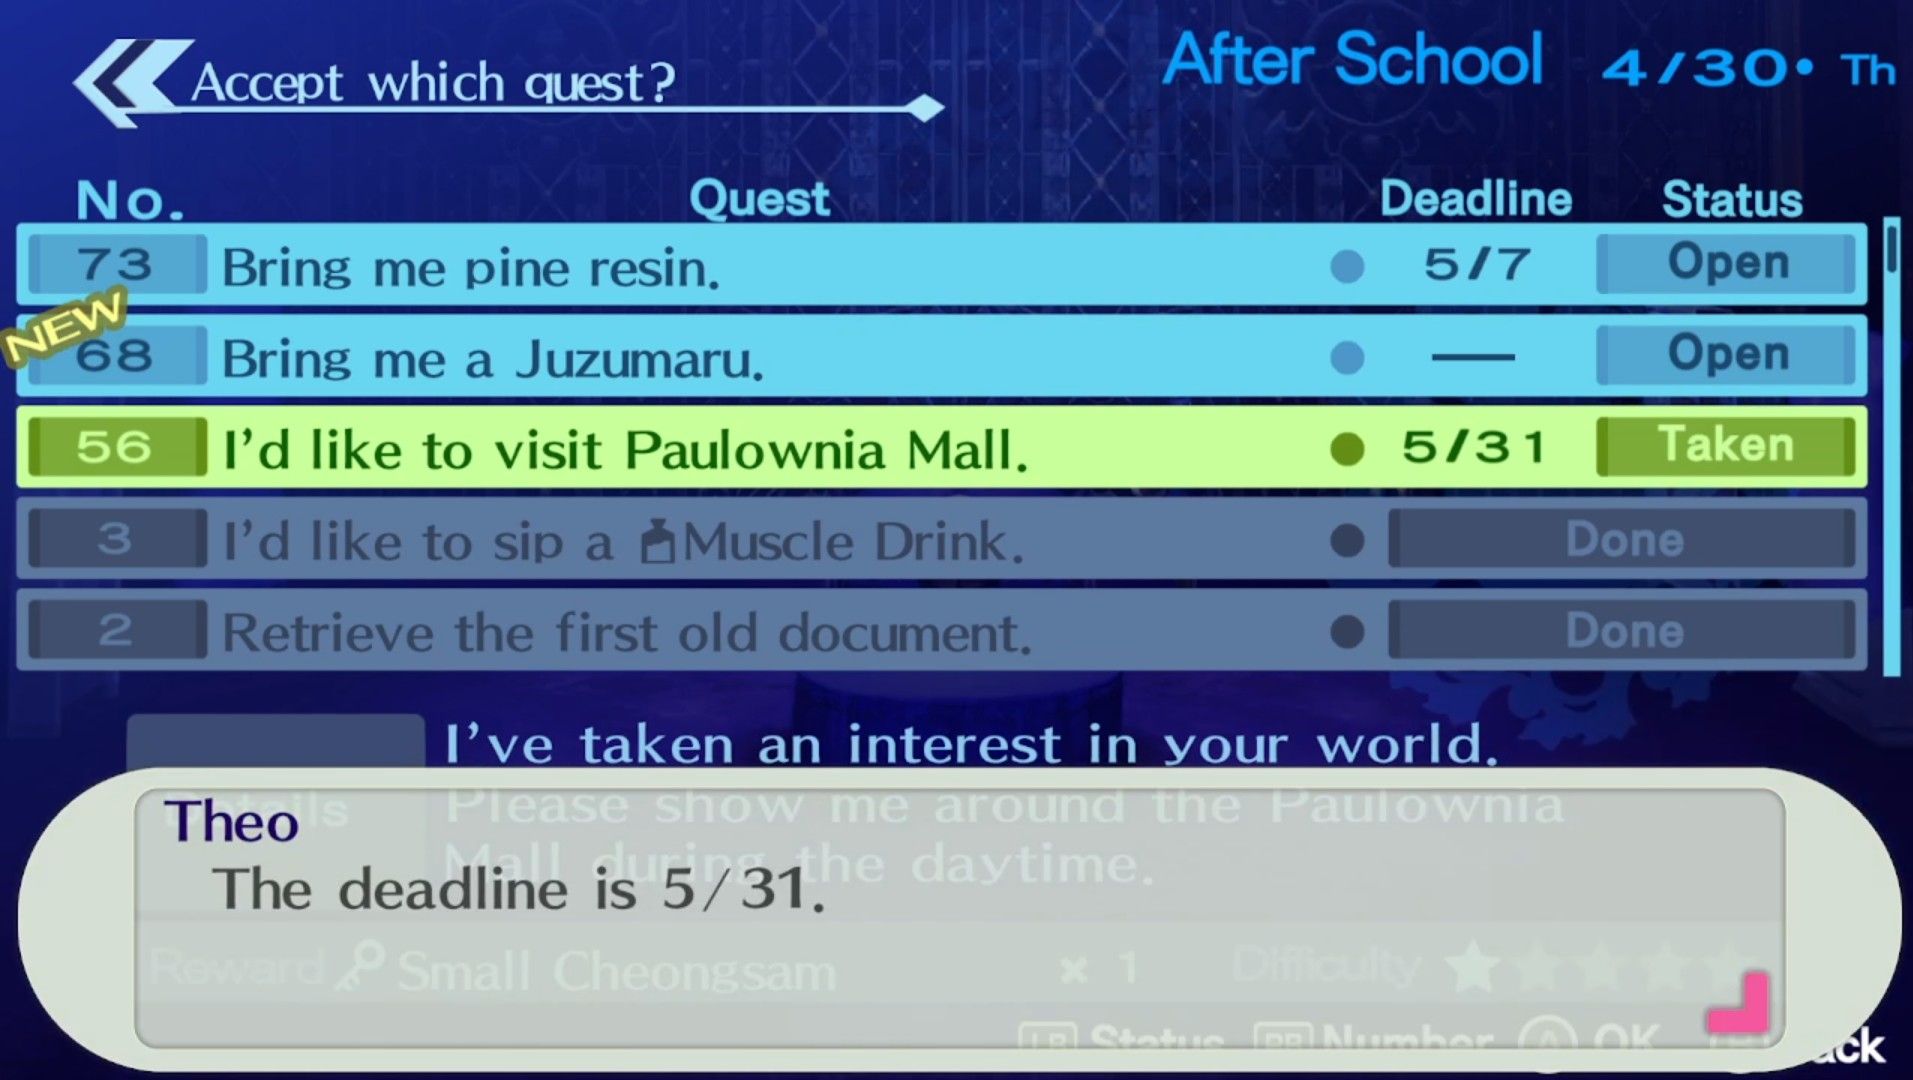 theodore informing the female protagonist of a quest deadline in persona 3 portable